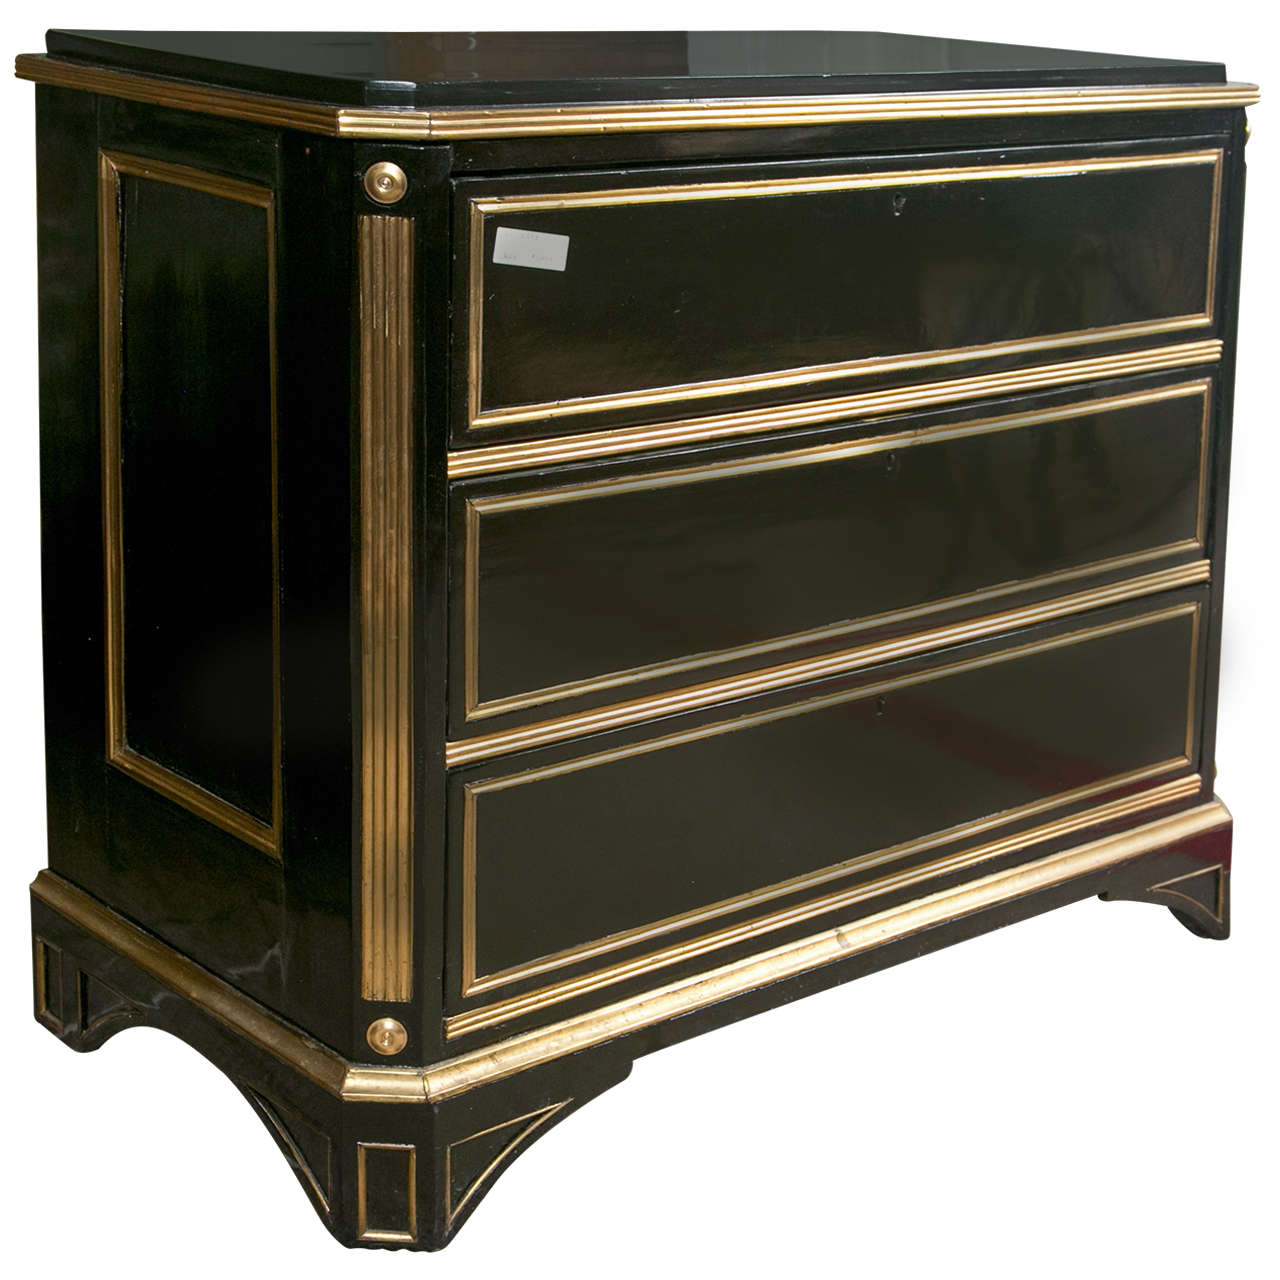 Russian Neoclassical Style Ebonized Commode / Chest of Drawers / Cabinet 19th C.